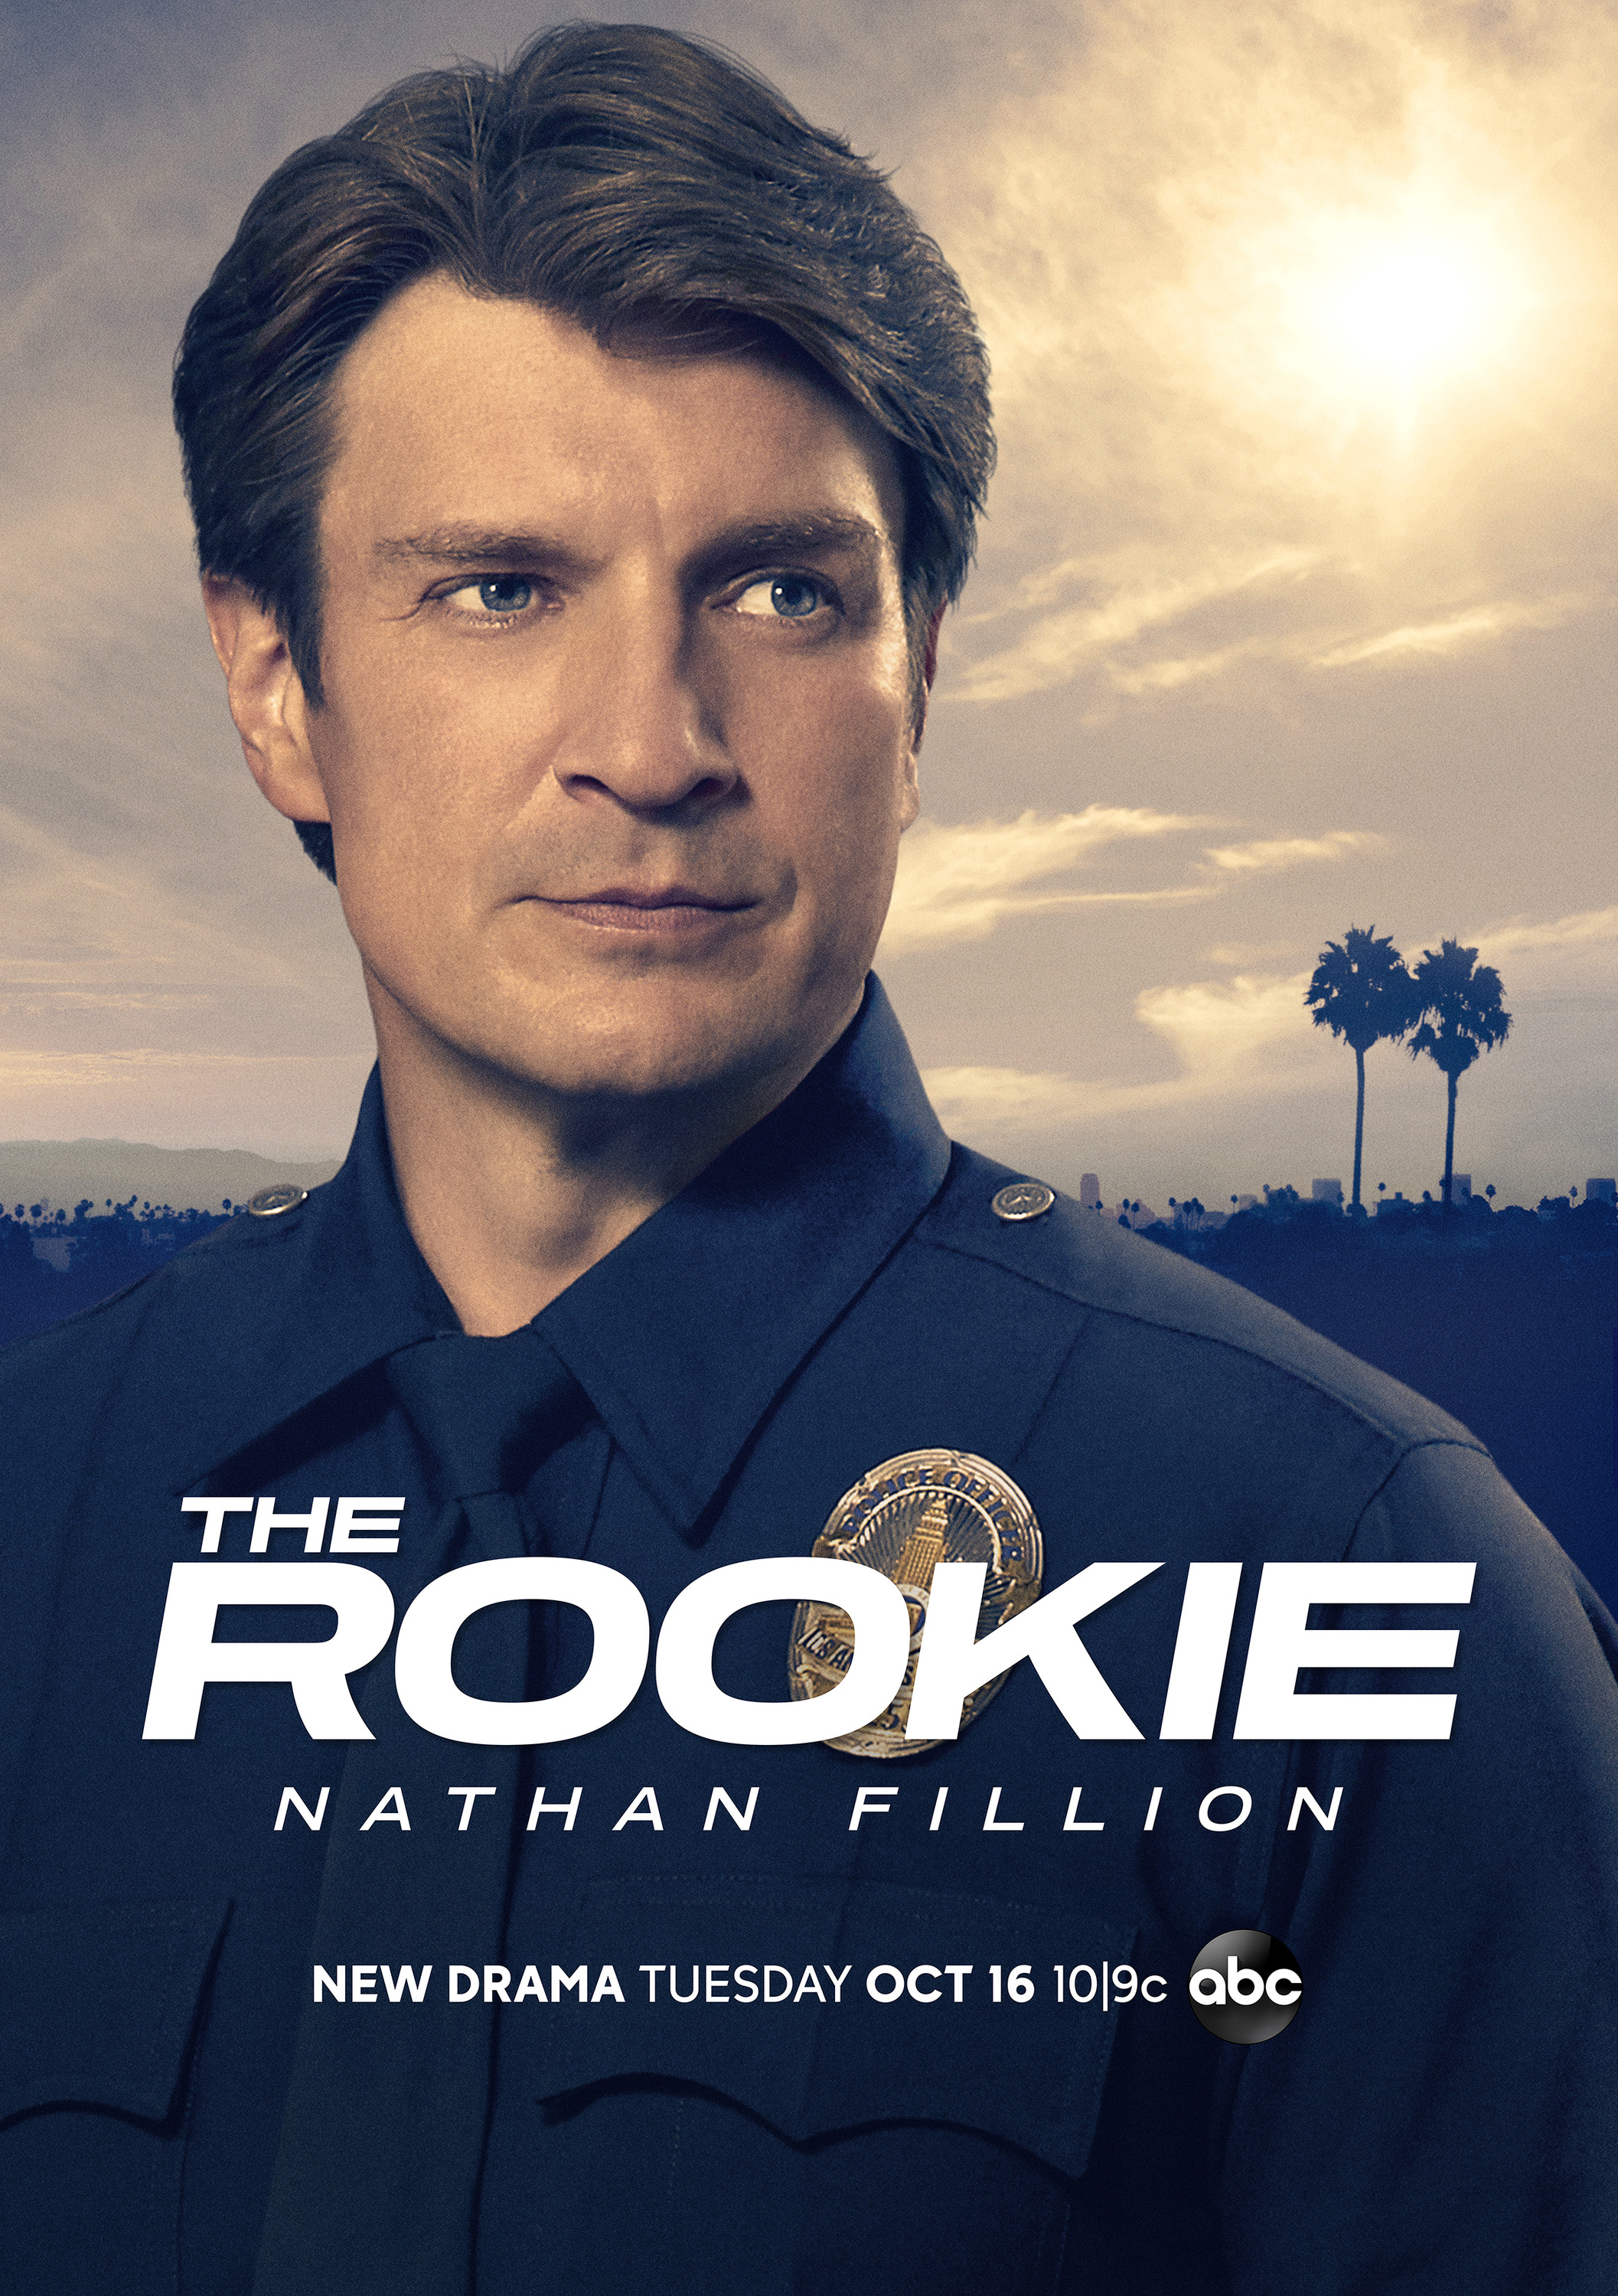 The Rookie (TV series) - Wikipedia